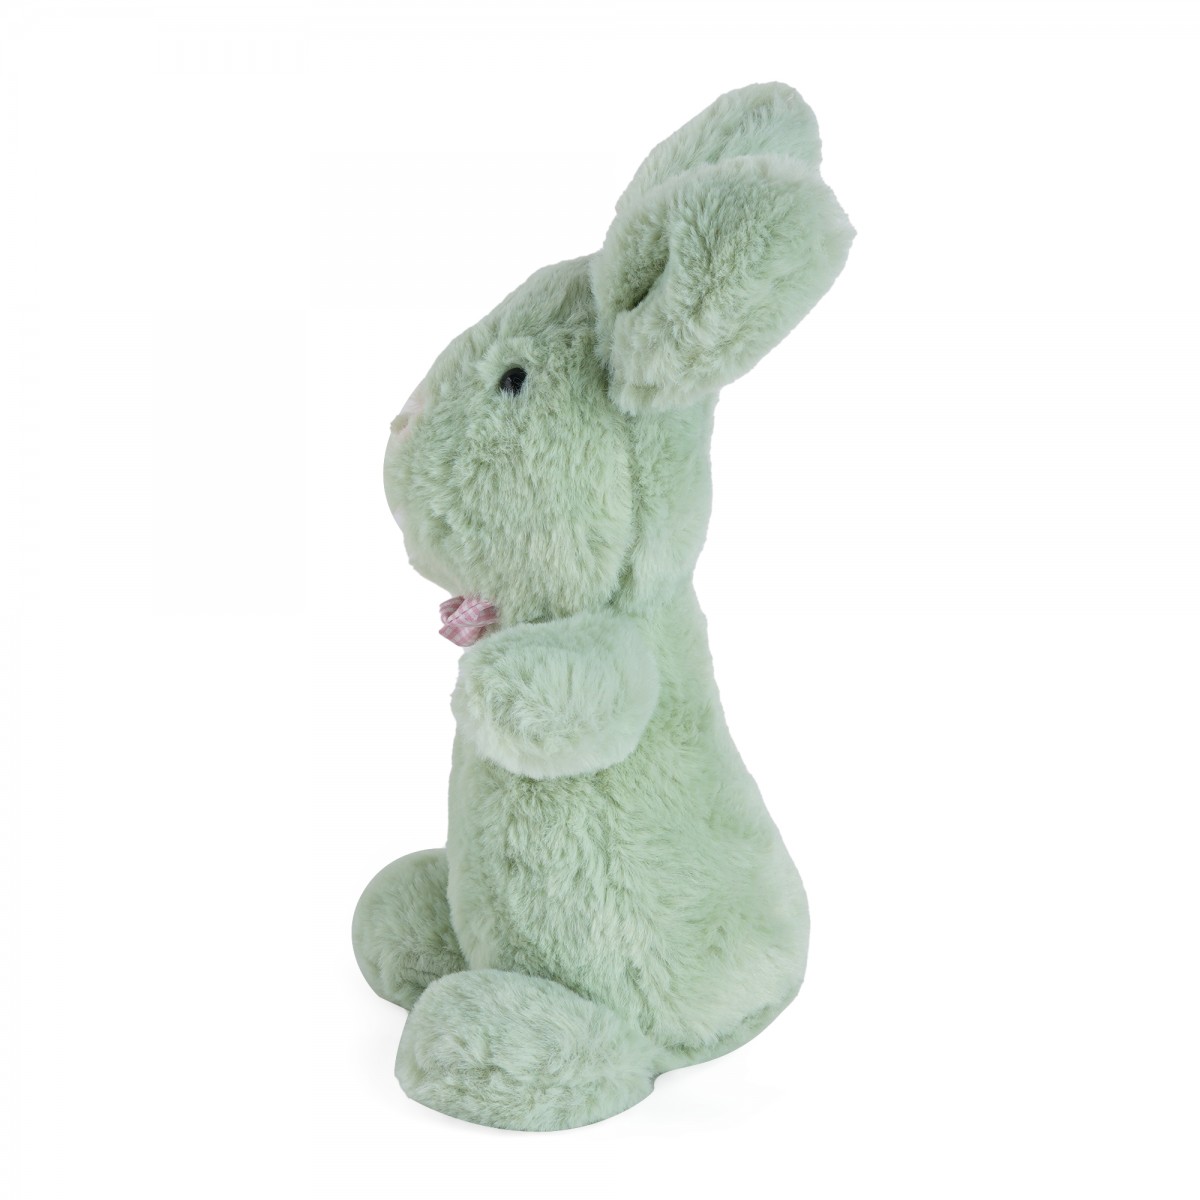 Huggable Cuddly Bunny Stuffed Toy By Fuzzbuzz, Soft Toys for Kids, Cute Plushies White, For Kids Of Age 2 Years & Above